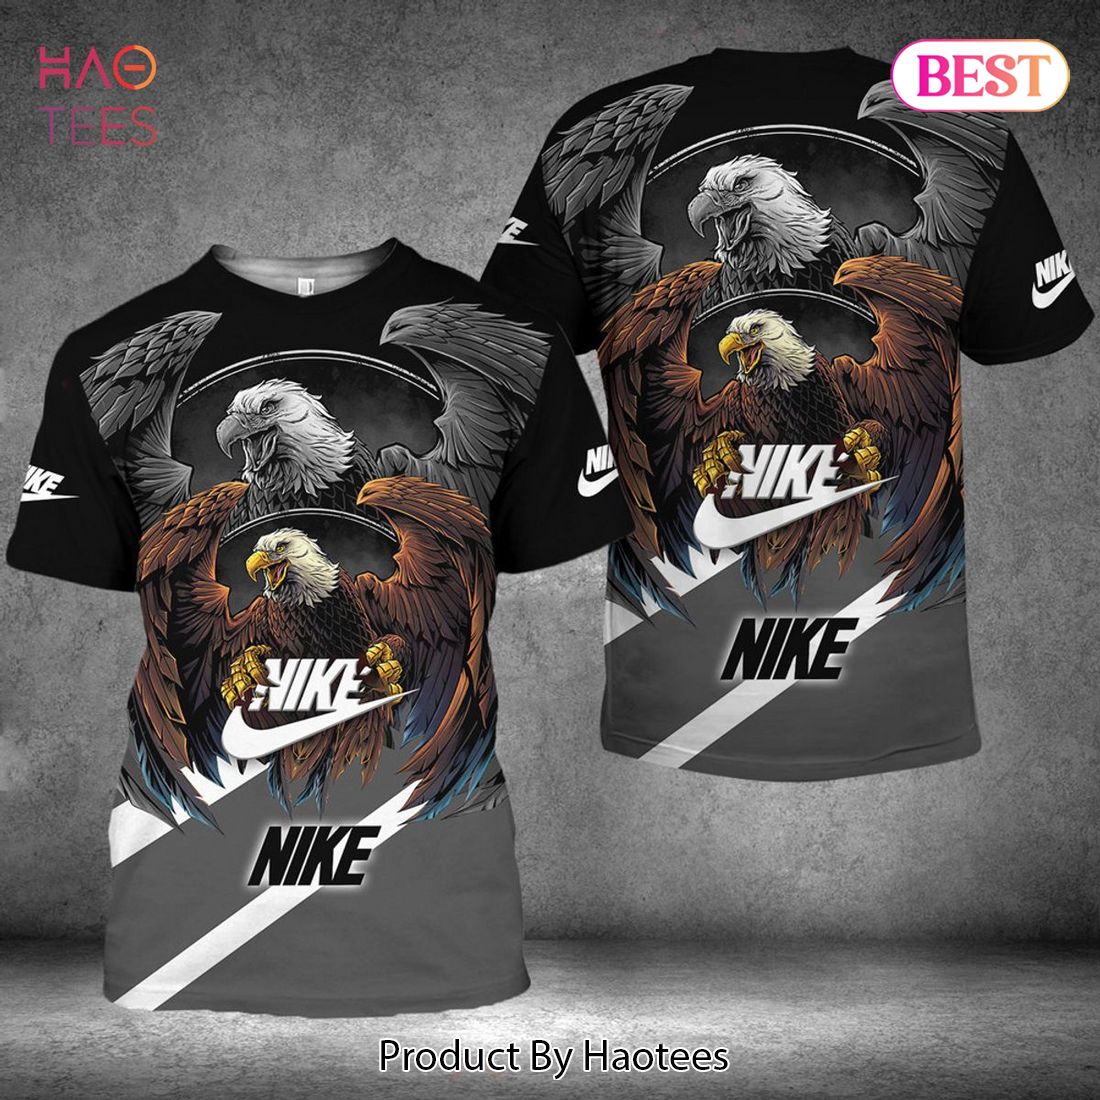 HOT Eagle Nike Luxury Brand 3D T-Shirt Limited Edition